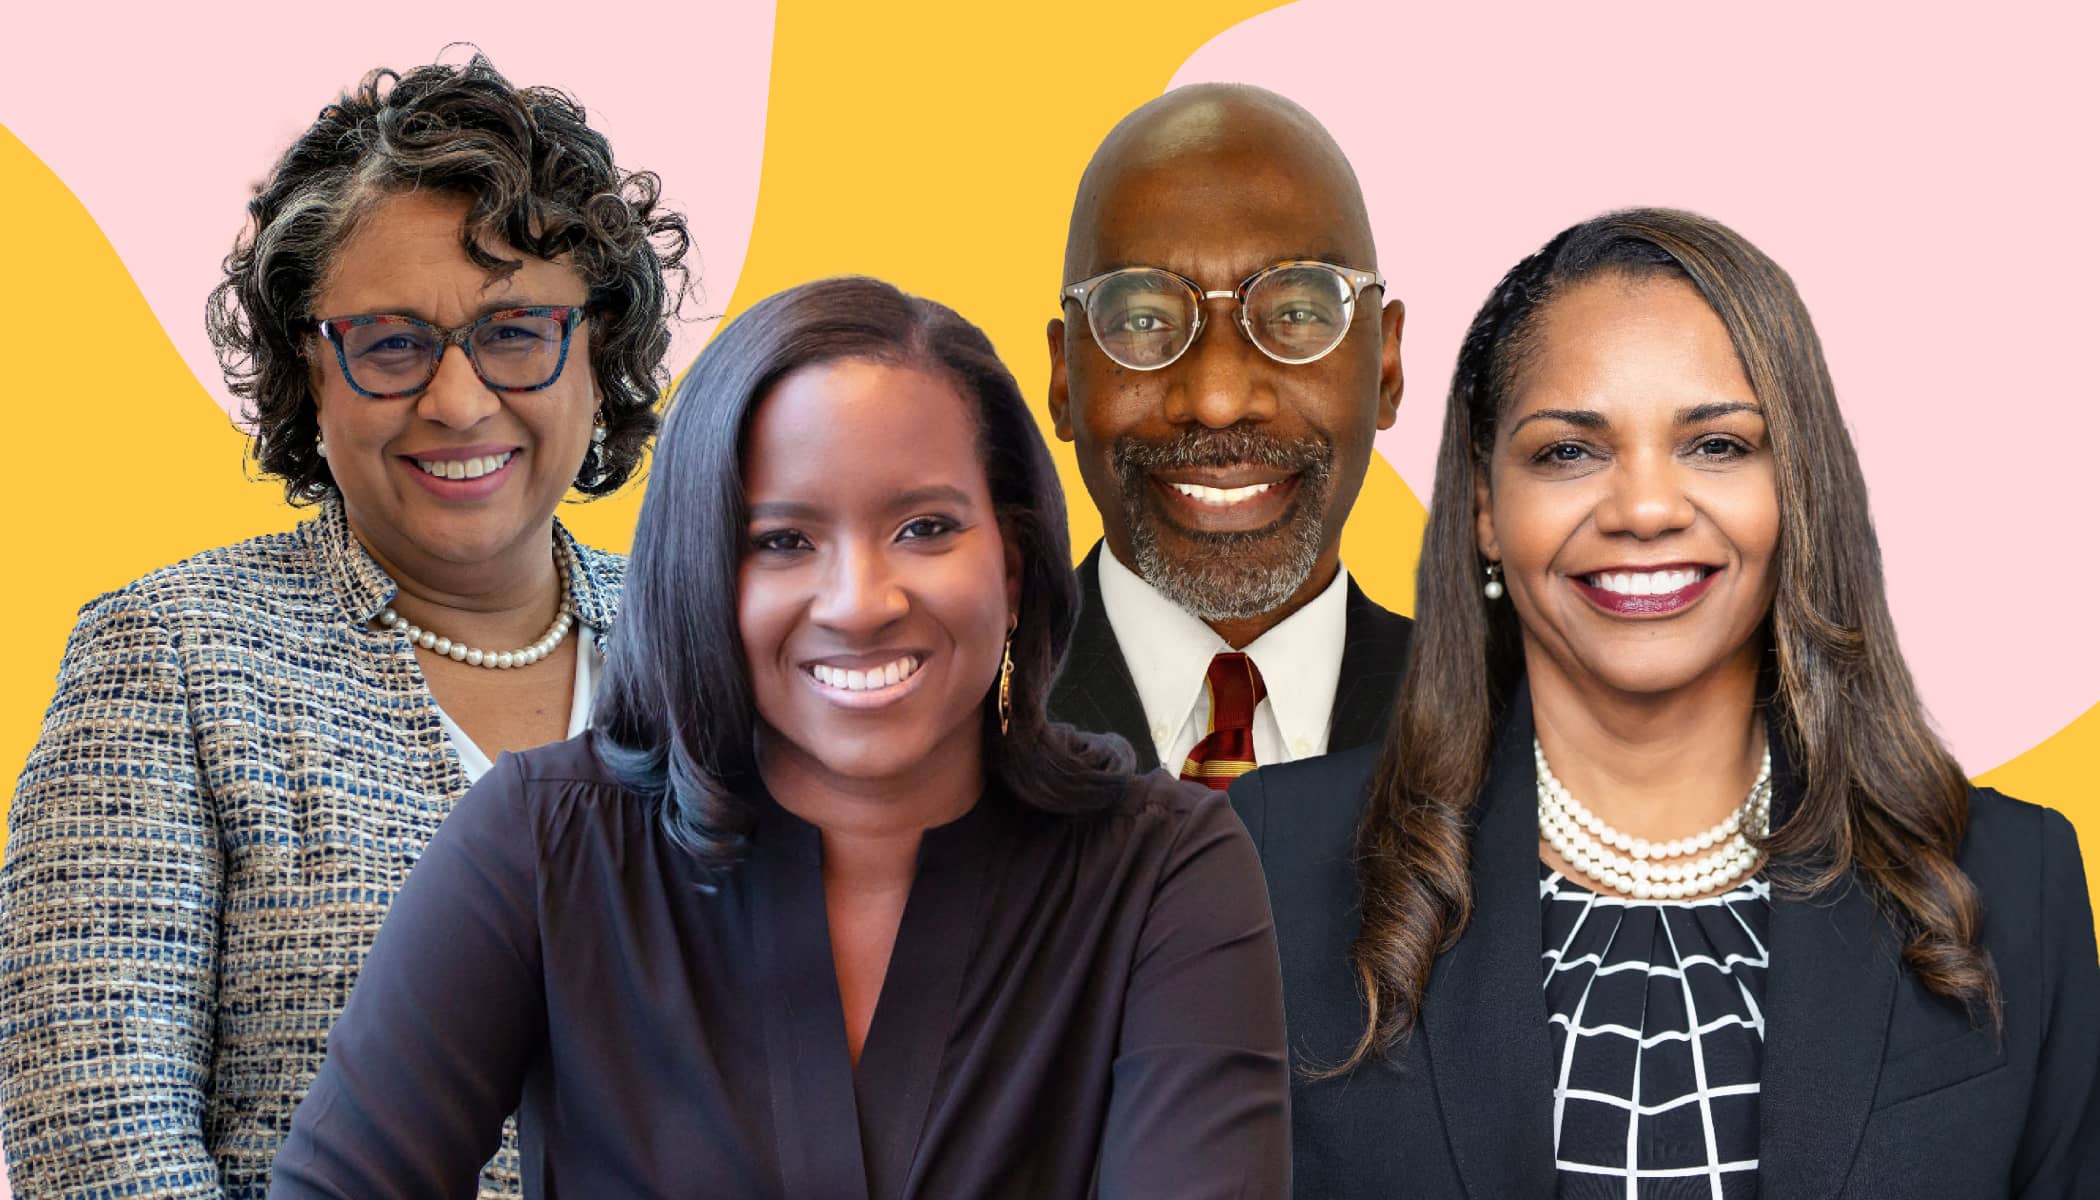 Headshots of four HBCU leaders on a pink and yellow background.